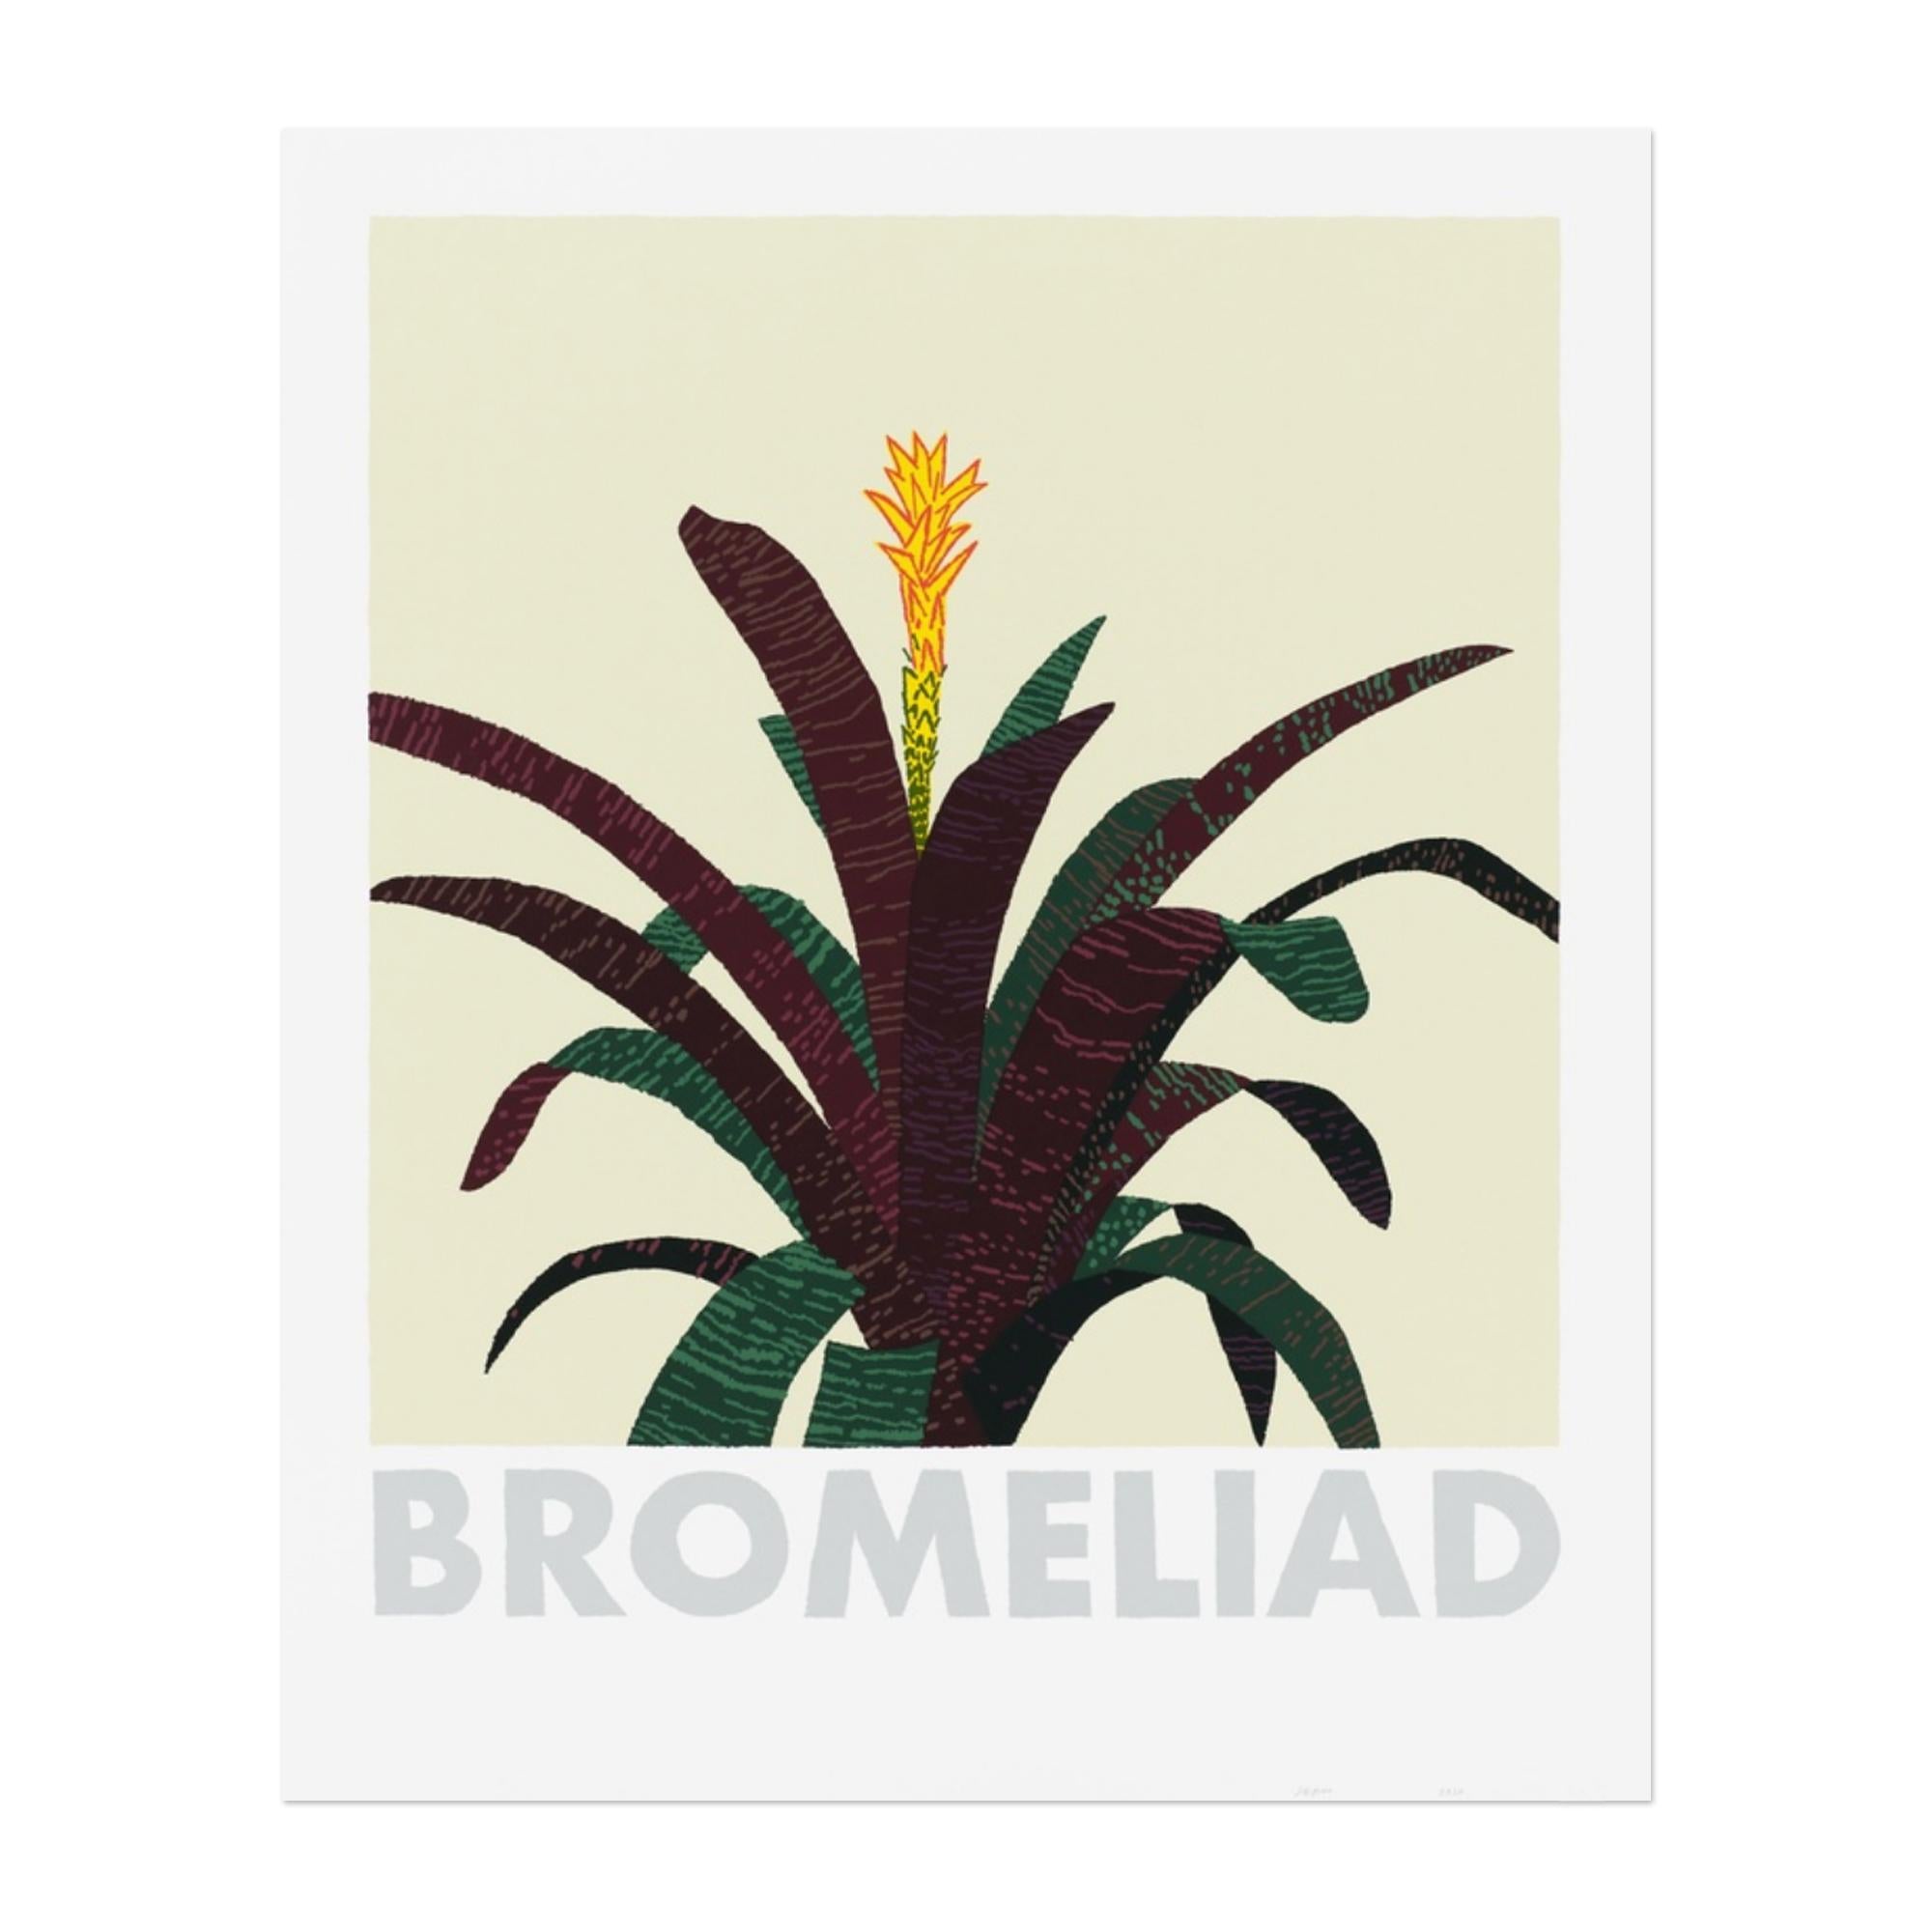 Jonas Wood (American, b. 1977)
Bromeliad, 2020
Medium: 13-color screen print on rising museum board
Dimensions: 28 × 23 in (71.1 × 58.4 cm)
Edition of 200: Hand signed and numbered
Condition: Excellent